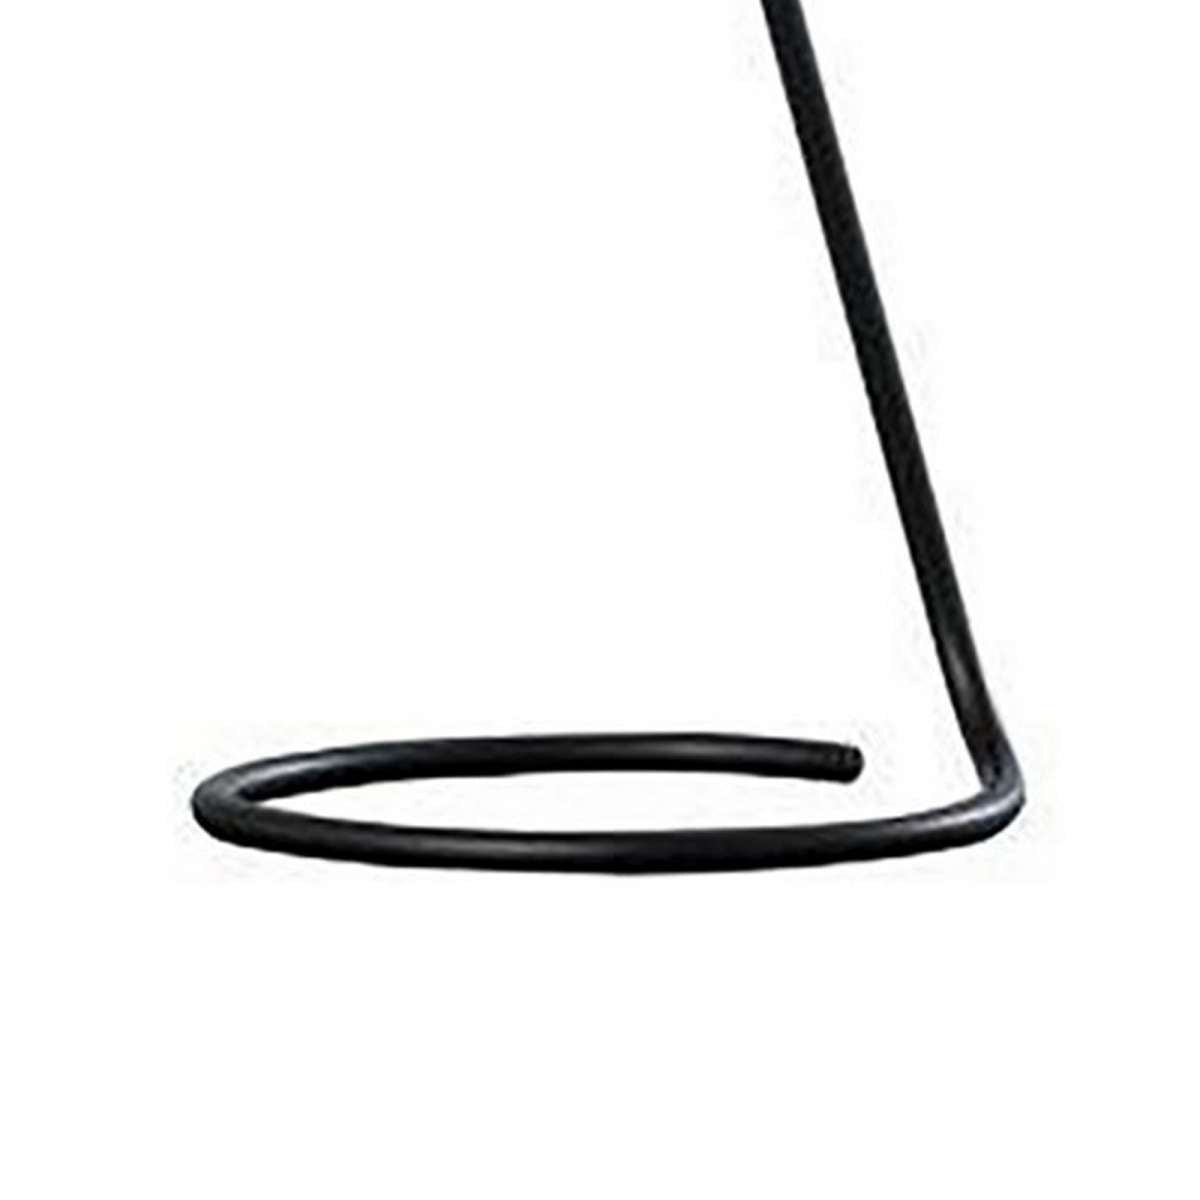 Desk Lamp With Pendulum Style And Flat Saucer Shade, Black By Benzara